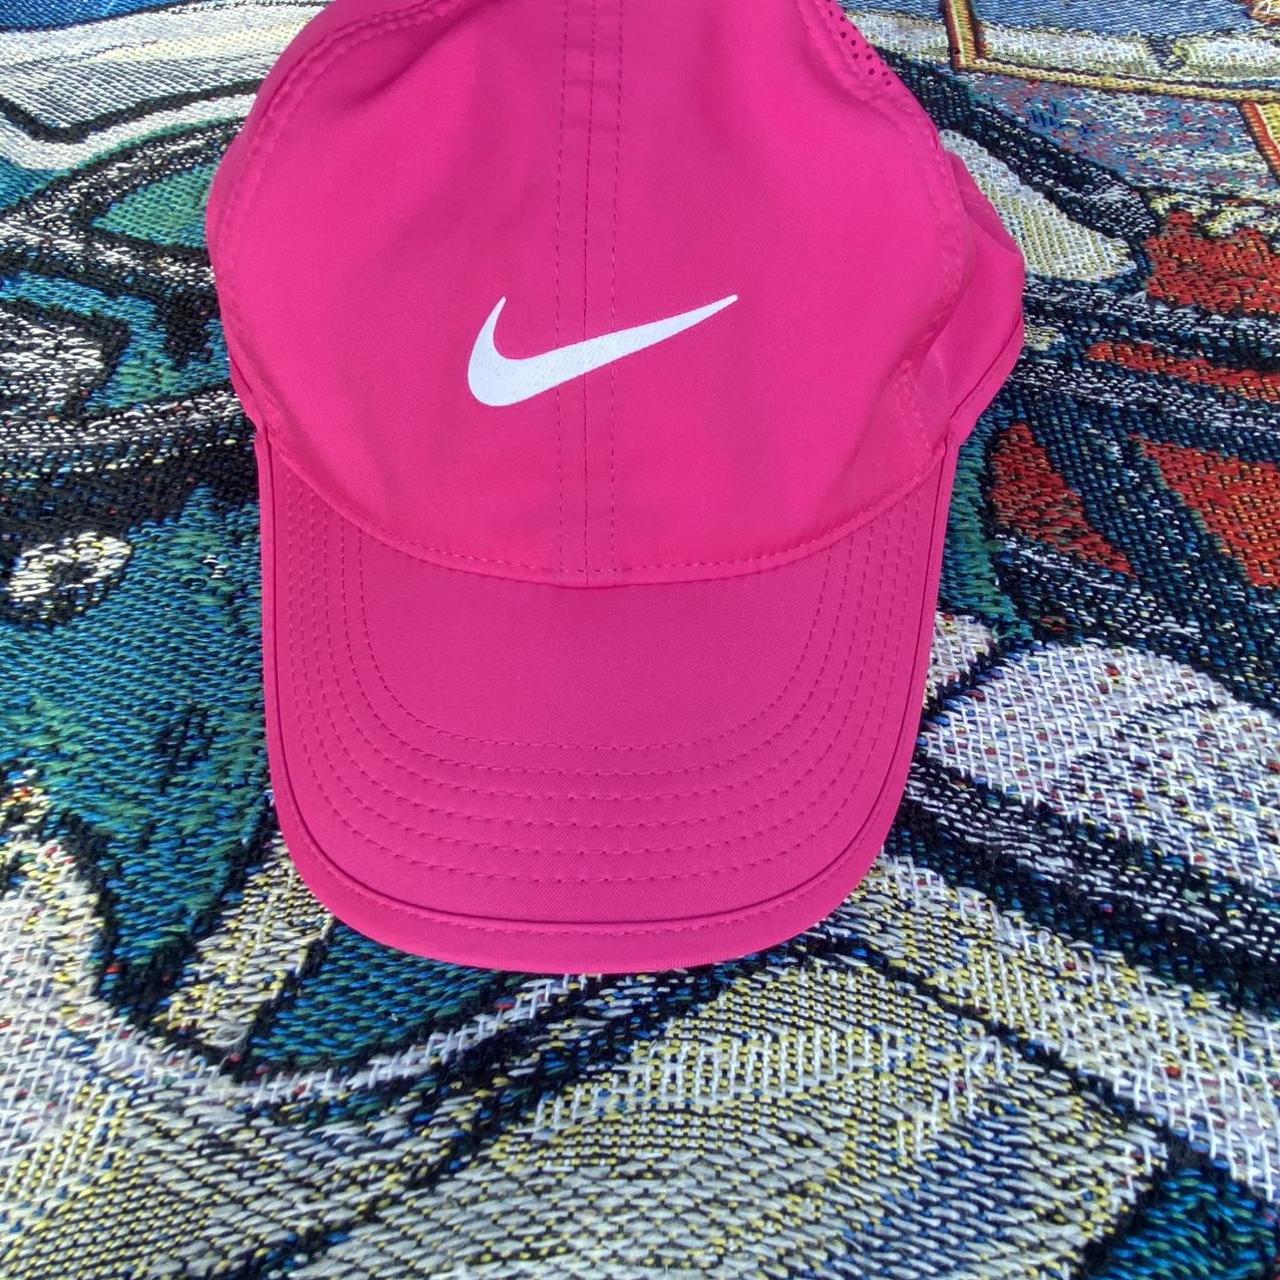 Hot pink Nike Dri fit hat In good condition #nike - Depop